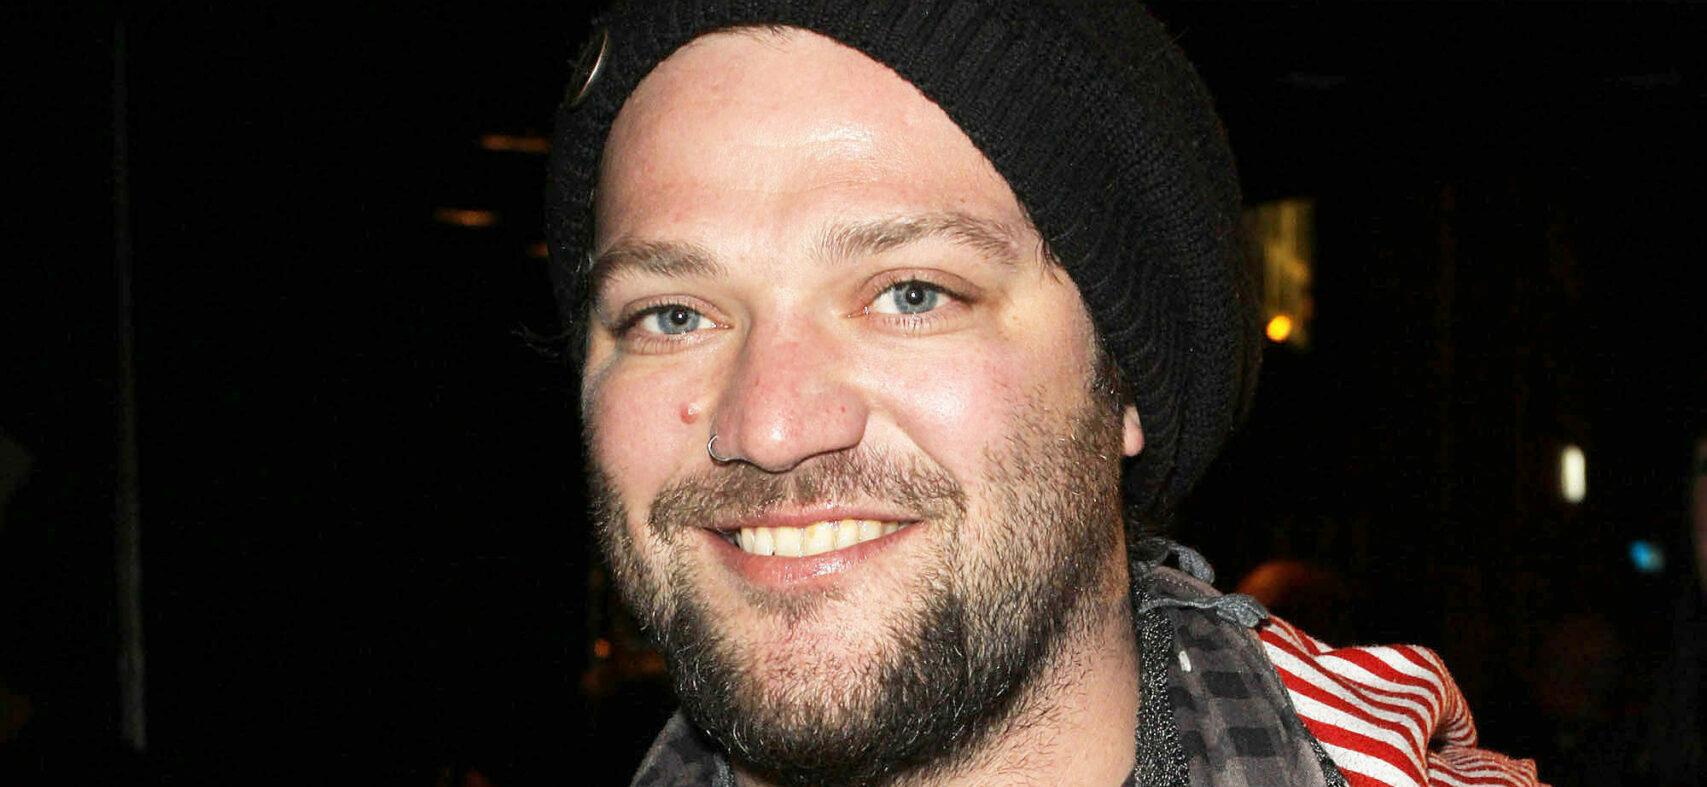 Bam Margera’s Brother Alleges The Star Is Addicted To Meth And On The Run From Police